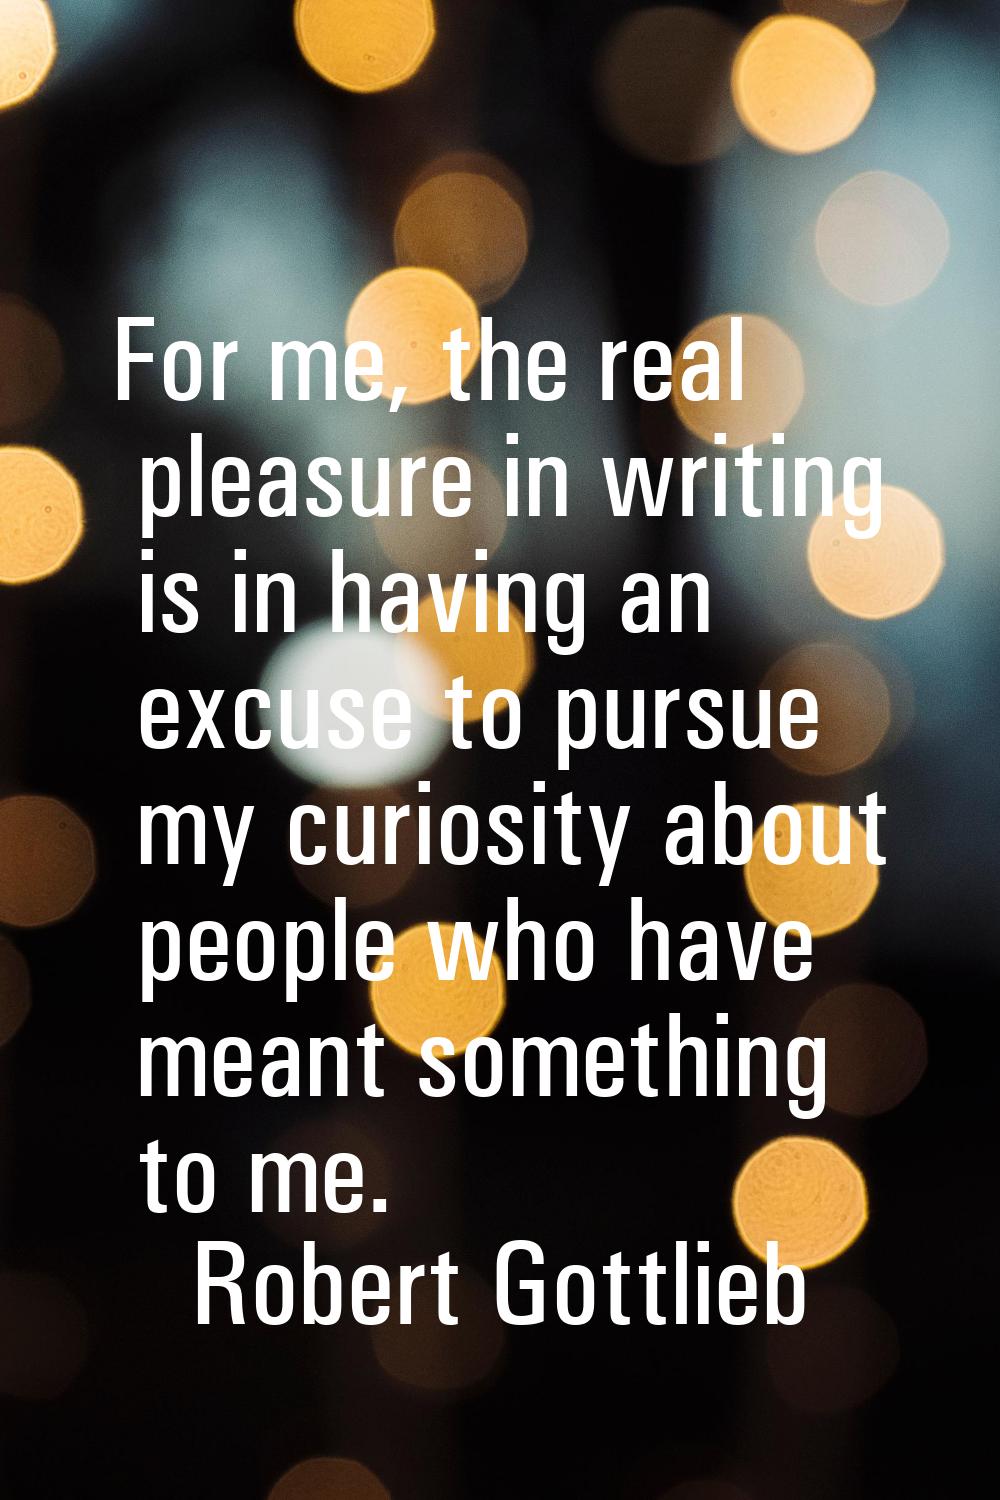 For me, the real pleasure in writing is in having an excuse to pursue my curiosity about people who